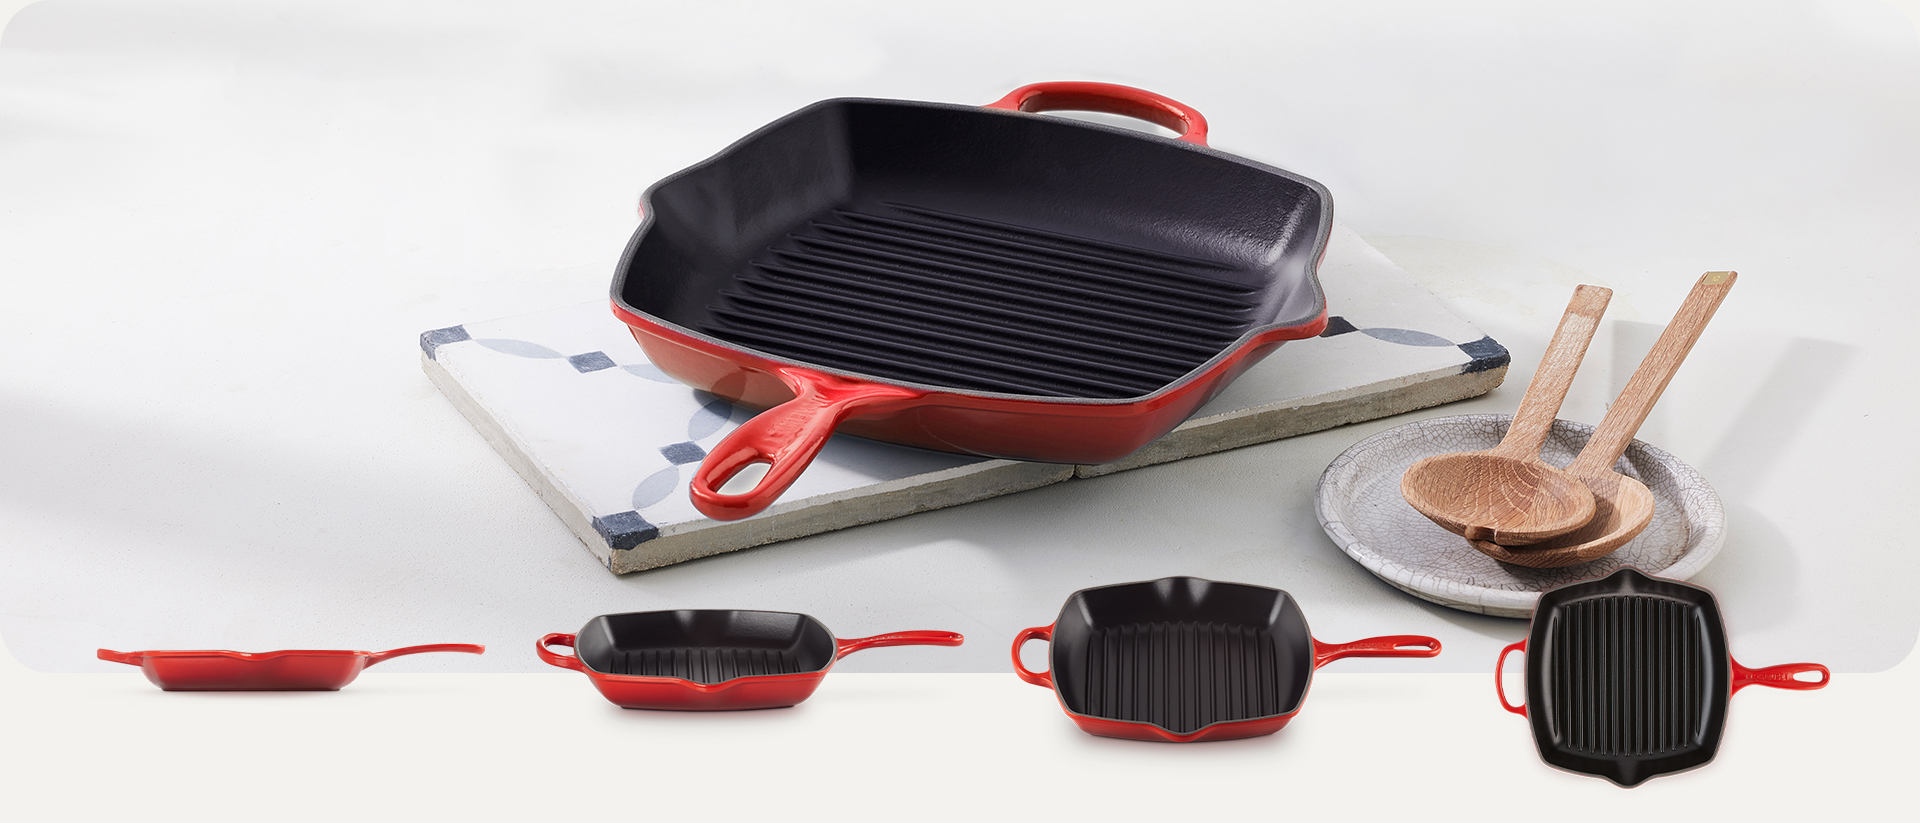 Le Creuset's Cast Iron Grill Will Satisfy Your Cookout Cravings Indoors